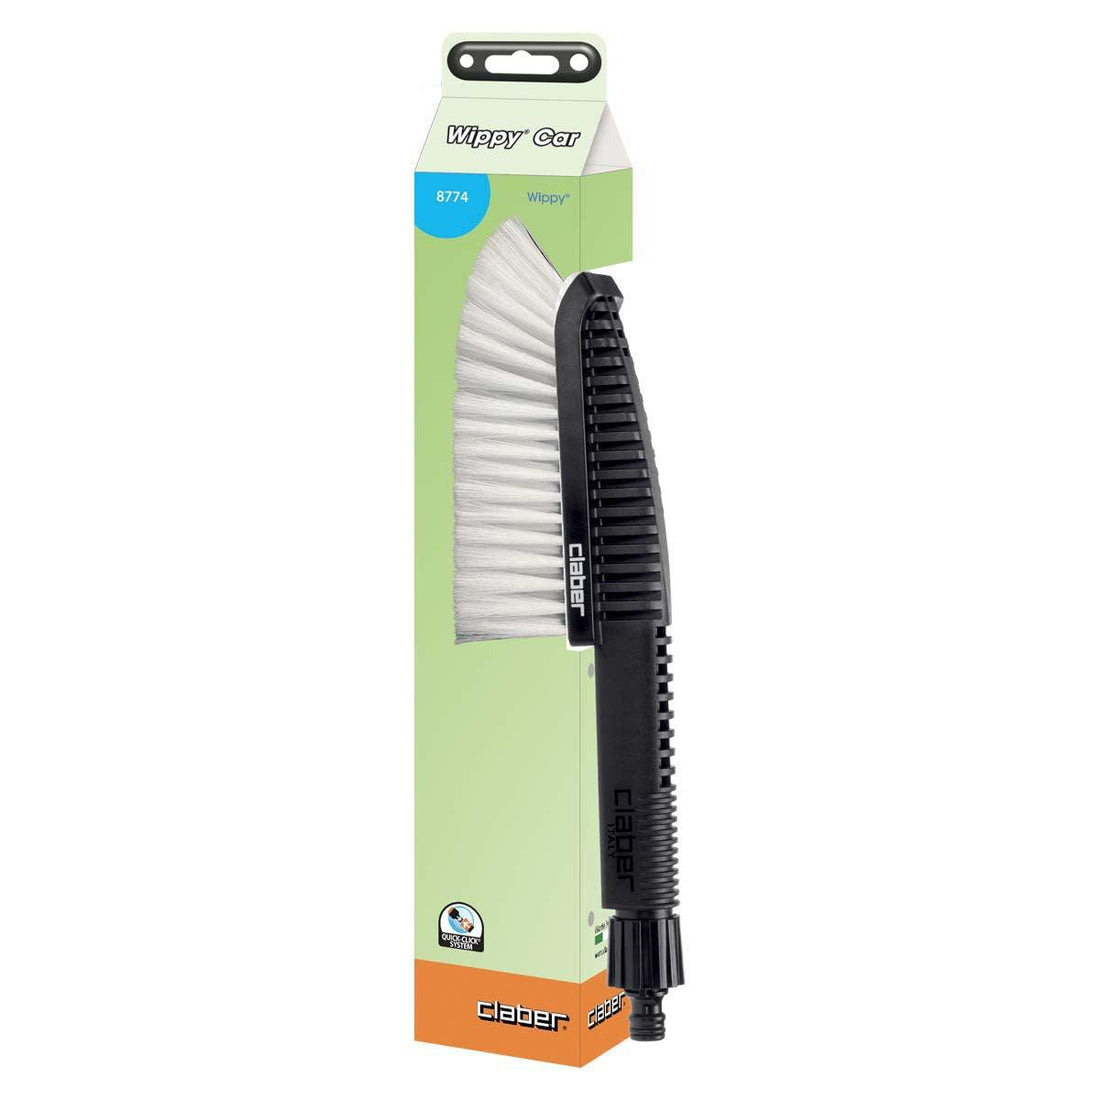 Wippy Car Wash Brush-8774 - THE GARDEN CENTRE